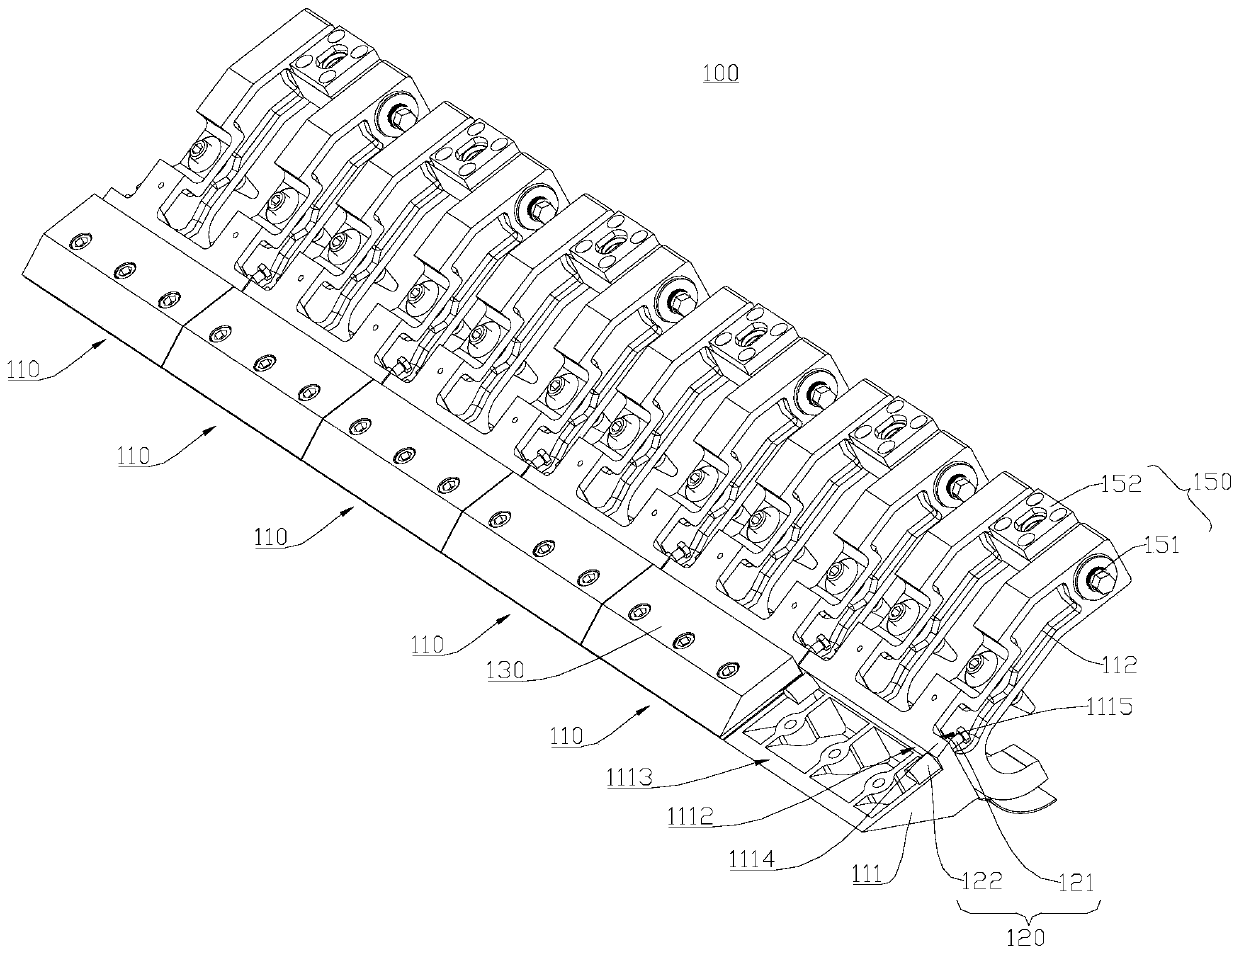 Knife rest structure, knife blade structure, knife blade mechanism, and rotary drum structure